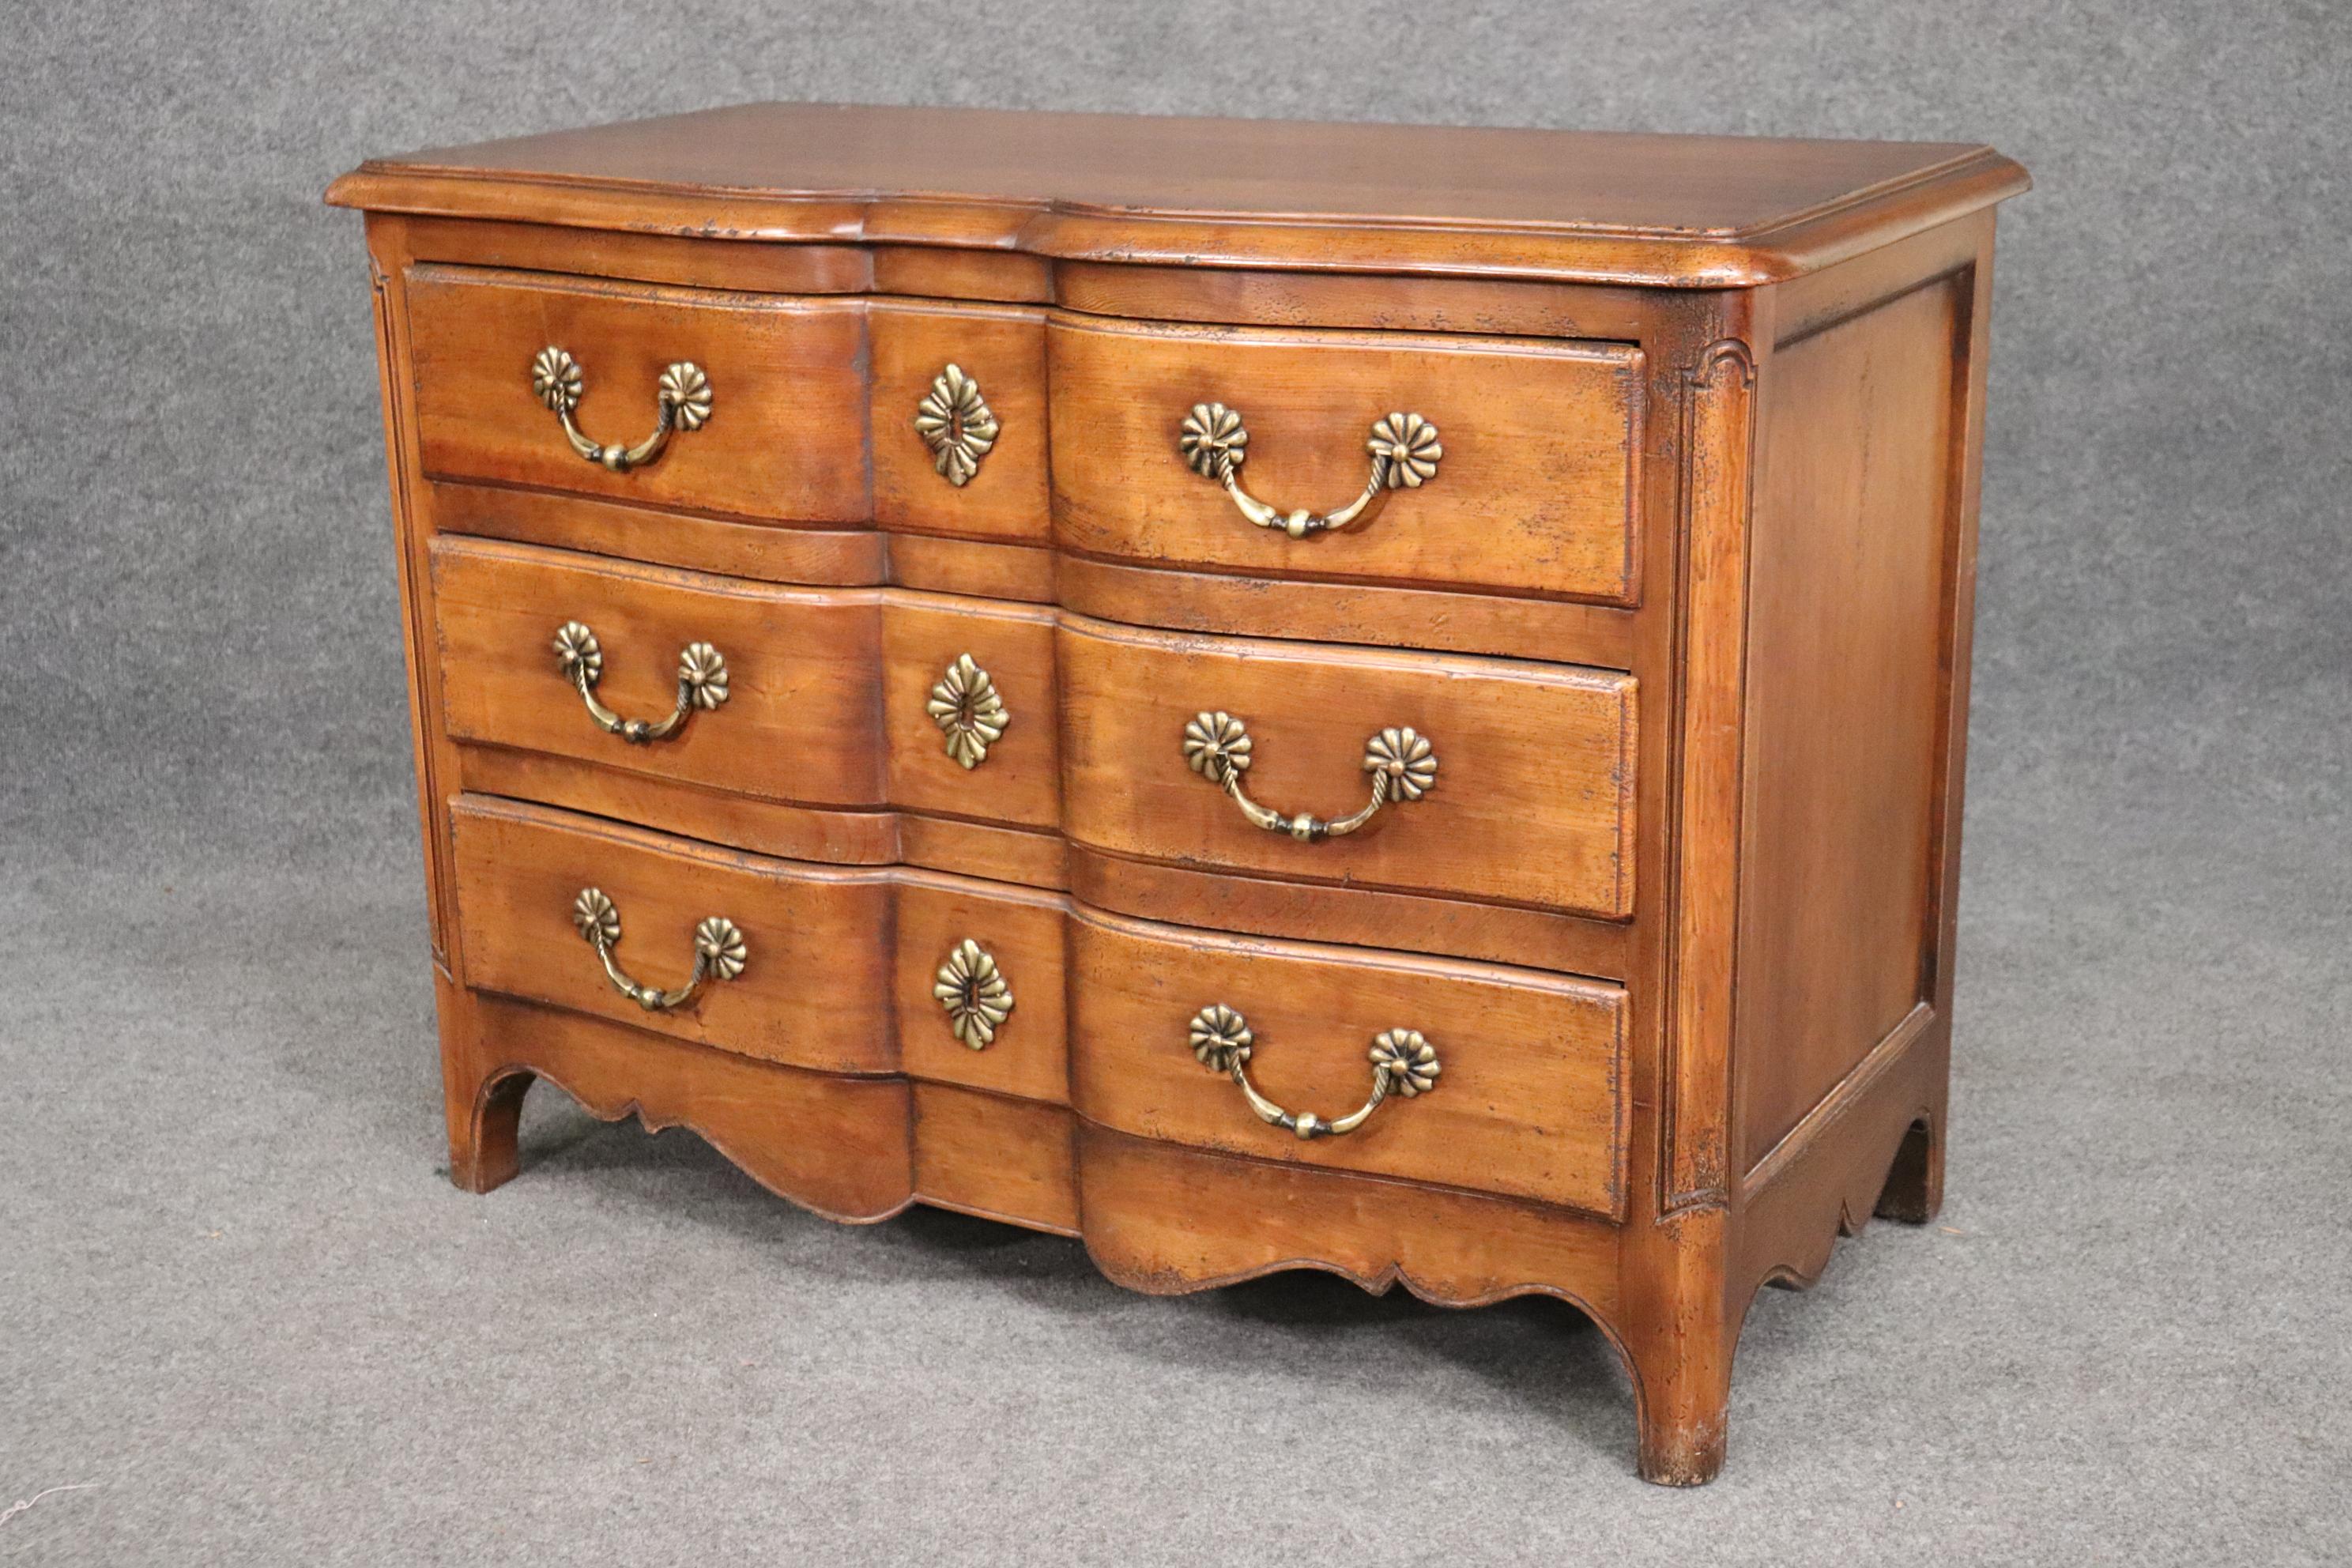 This is a beautiful high quality commode in the French country style. Made of walnut and featuring beautiful brass hardware, this commode can be painted or used as is. The commode measures 46 wide x 34 tall x 23 deep and dates to the 1950s era. The